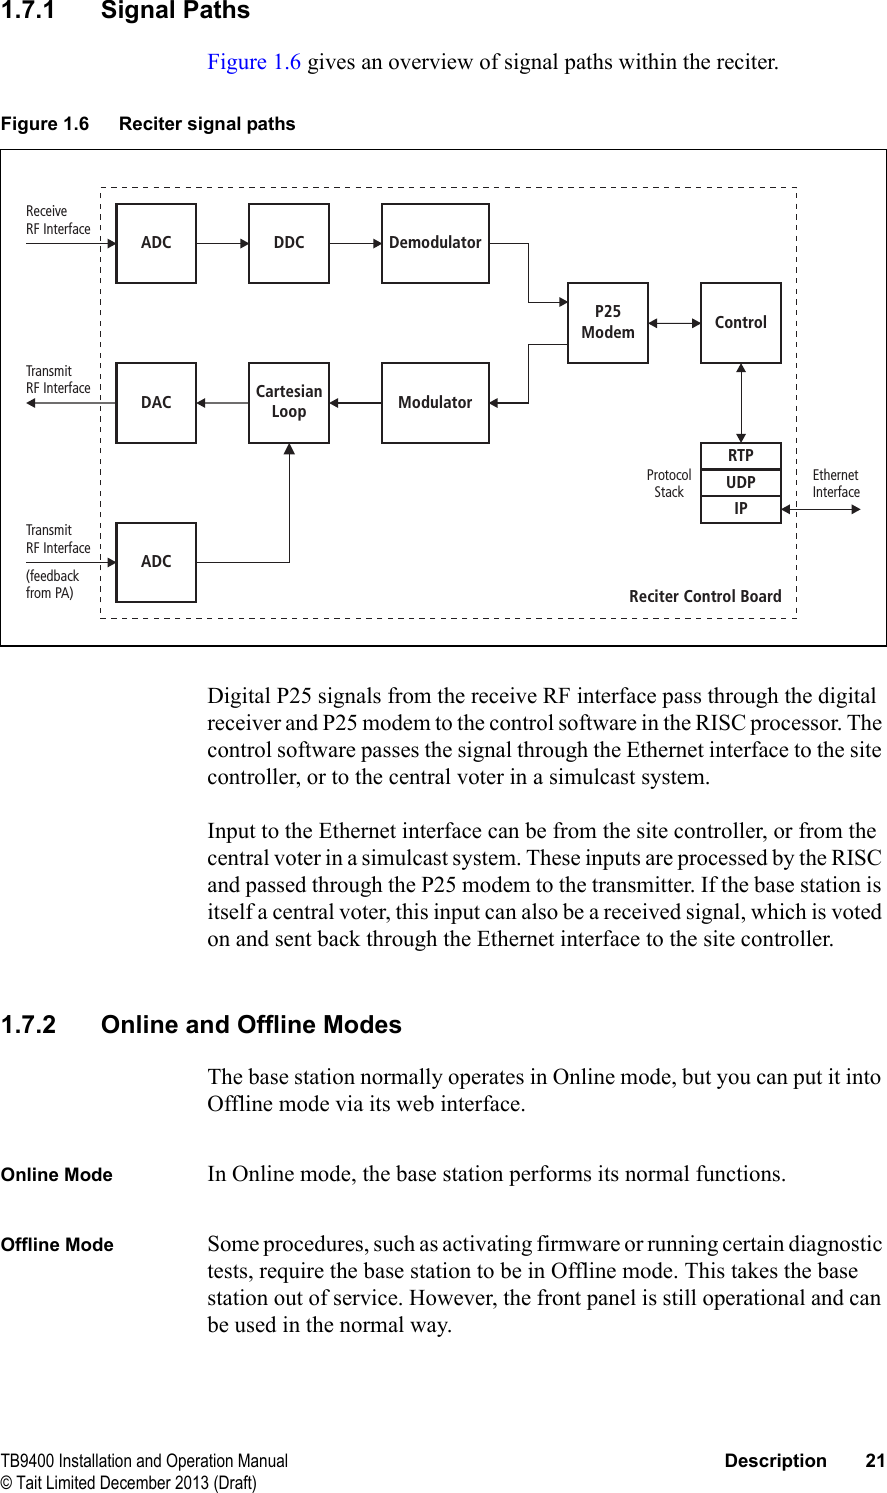  TB9400 Installation and Operation Manual Description 21© Tait Limited December 2013 (Draft)1.7.1 Signal PathsFigure 1.6 gives an overview of signal paths within the reciter. Digital P25 signals from the receive RF interface pass through the digital receiver and P25 modem to the control software in the RISC processor. The control software passes the signal through the Ethernet interface to the site controller, or to the central voter in a simulcast system.Input to the Ethernet interface can be from the site controller, or from the central voter in a simulcast system. These inputs are processed by the RISC and passed through the P25 modem to the transmitter. If the base station is itself a central voter, this input can also be a received signal, which is voted on and sent back through the Ethernet interface to the site controller.1.7.2 Online and Offline ModesThe base station normally operates in Online mode, but you can put it into Offline mode via its web interface.Online Mode In Online mode, the base station performs its normal functions. Offline Mode Some procedures, such as activating firmware or running certain diagnostic tests, require the base station to be in Offline mode. This takes the base station out of service. However, the front panel is still operational and can be used in the normal way. Figure 1.6 Reciter signal pathsModulatorDemodulatorP25ModemCartesianLoopControlADCADCDDCDACRTPUDPIPTransmitRF InterfaceTransmitRF Interface(feedbackfrom PA)ReceiveRF InterfaceEthernetInterfaceProtocolStackReciter Control Board